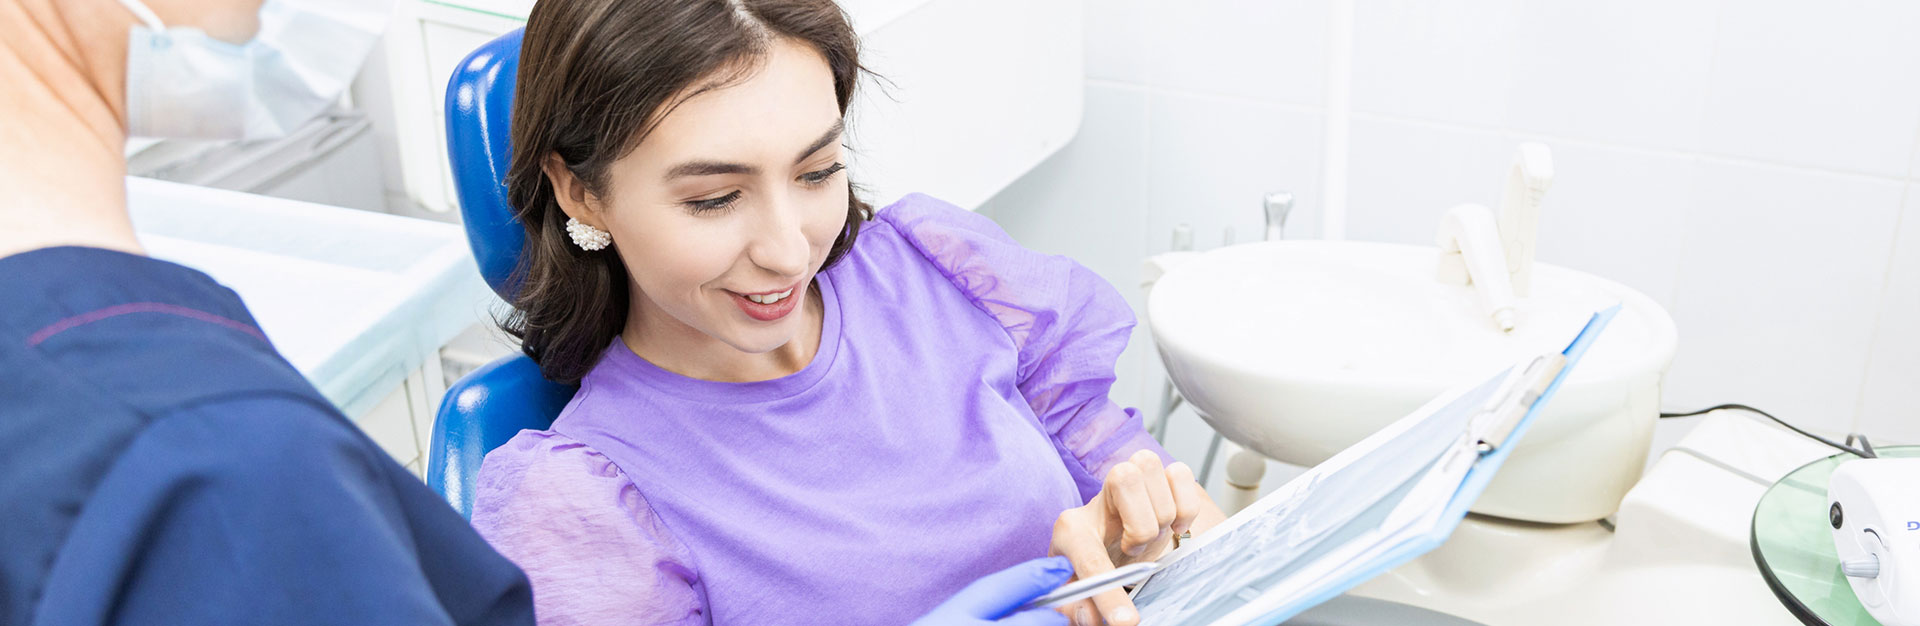 A woman is having comprehensive exams at dental